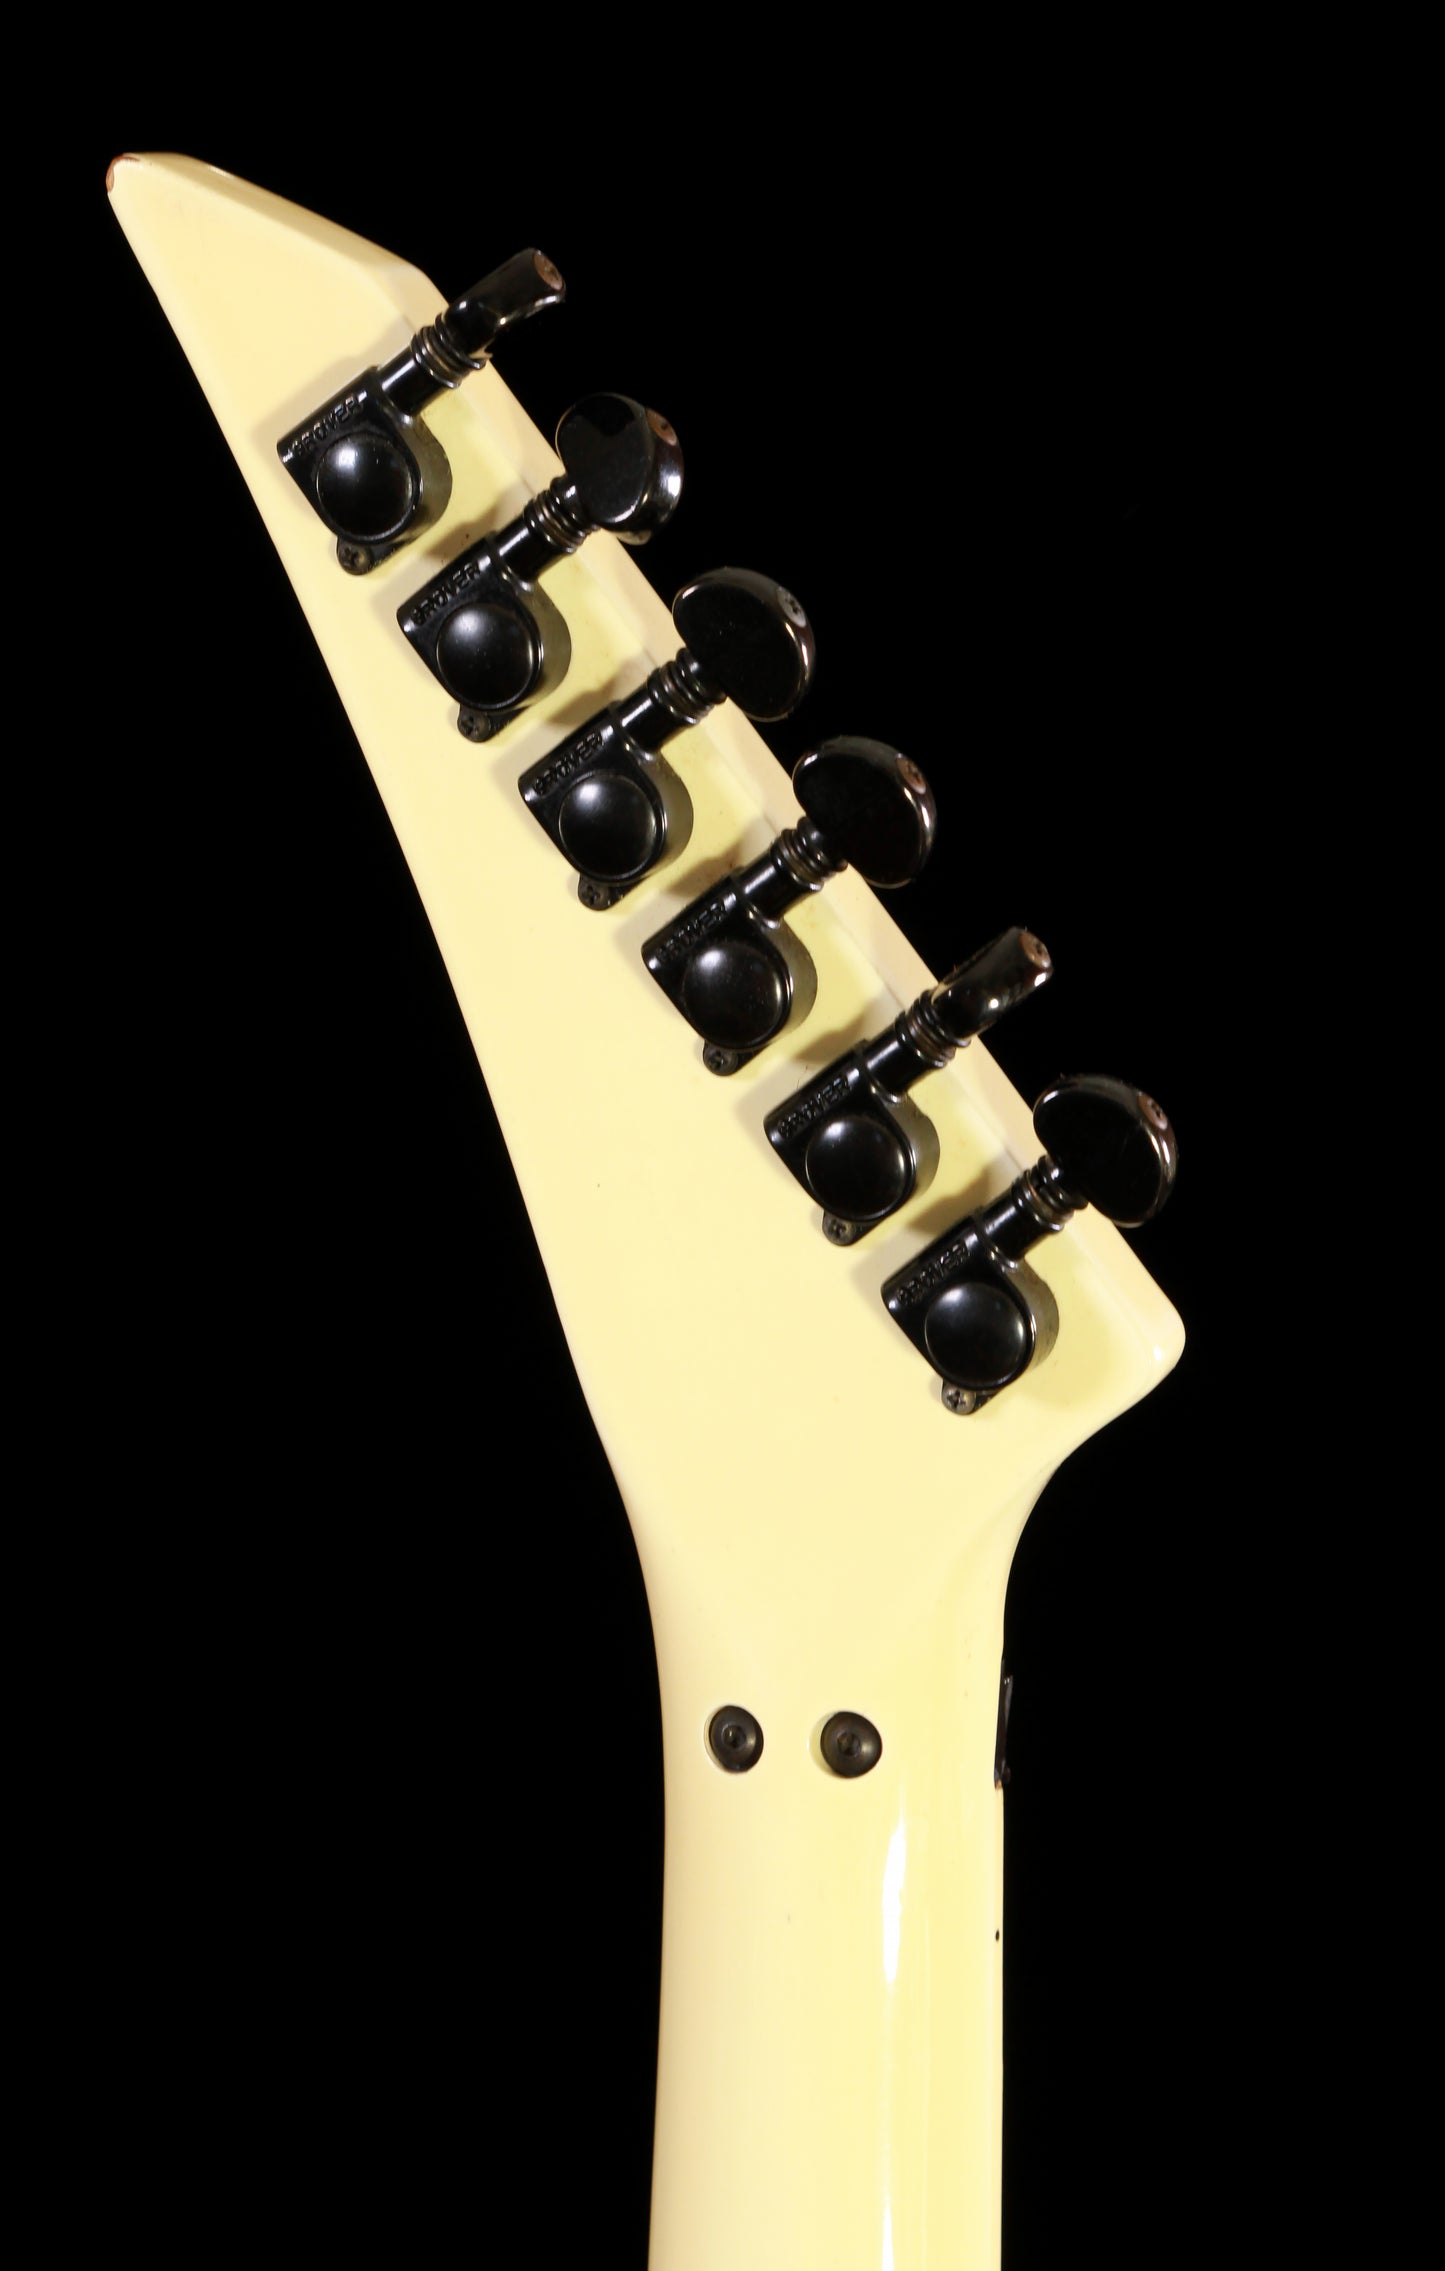 Greco JJ-75 Device with Spirit Energy Superstrat White